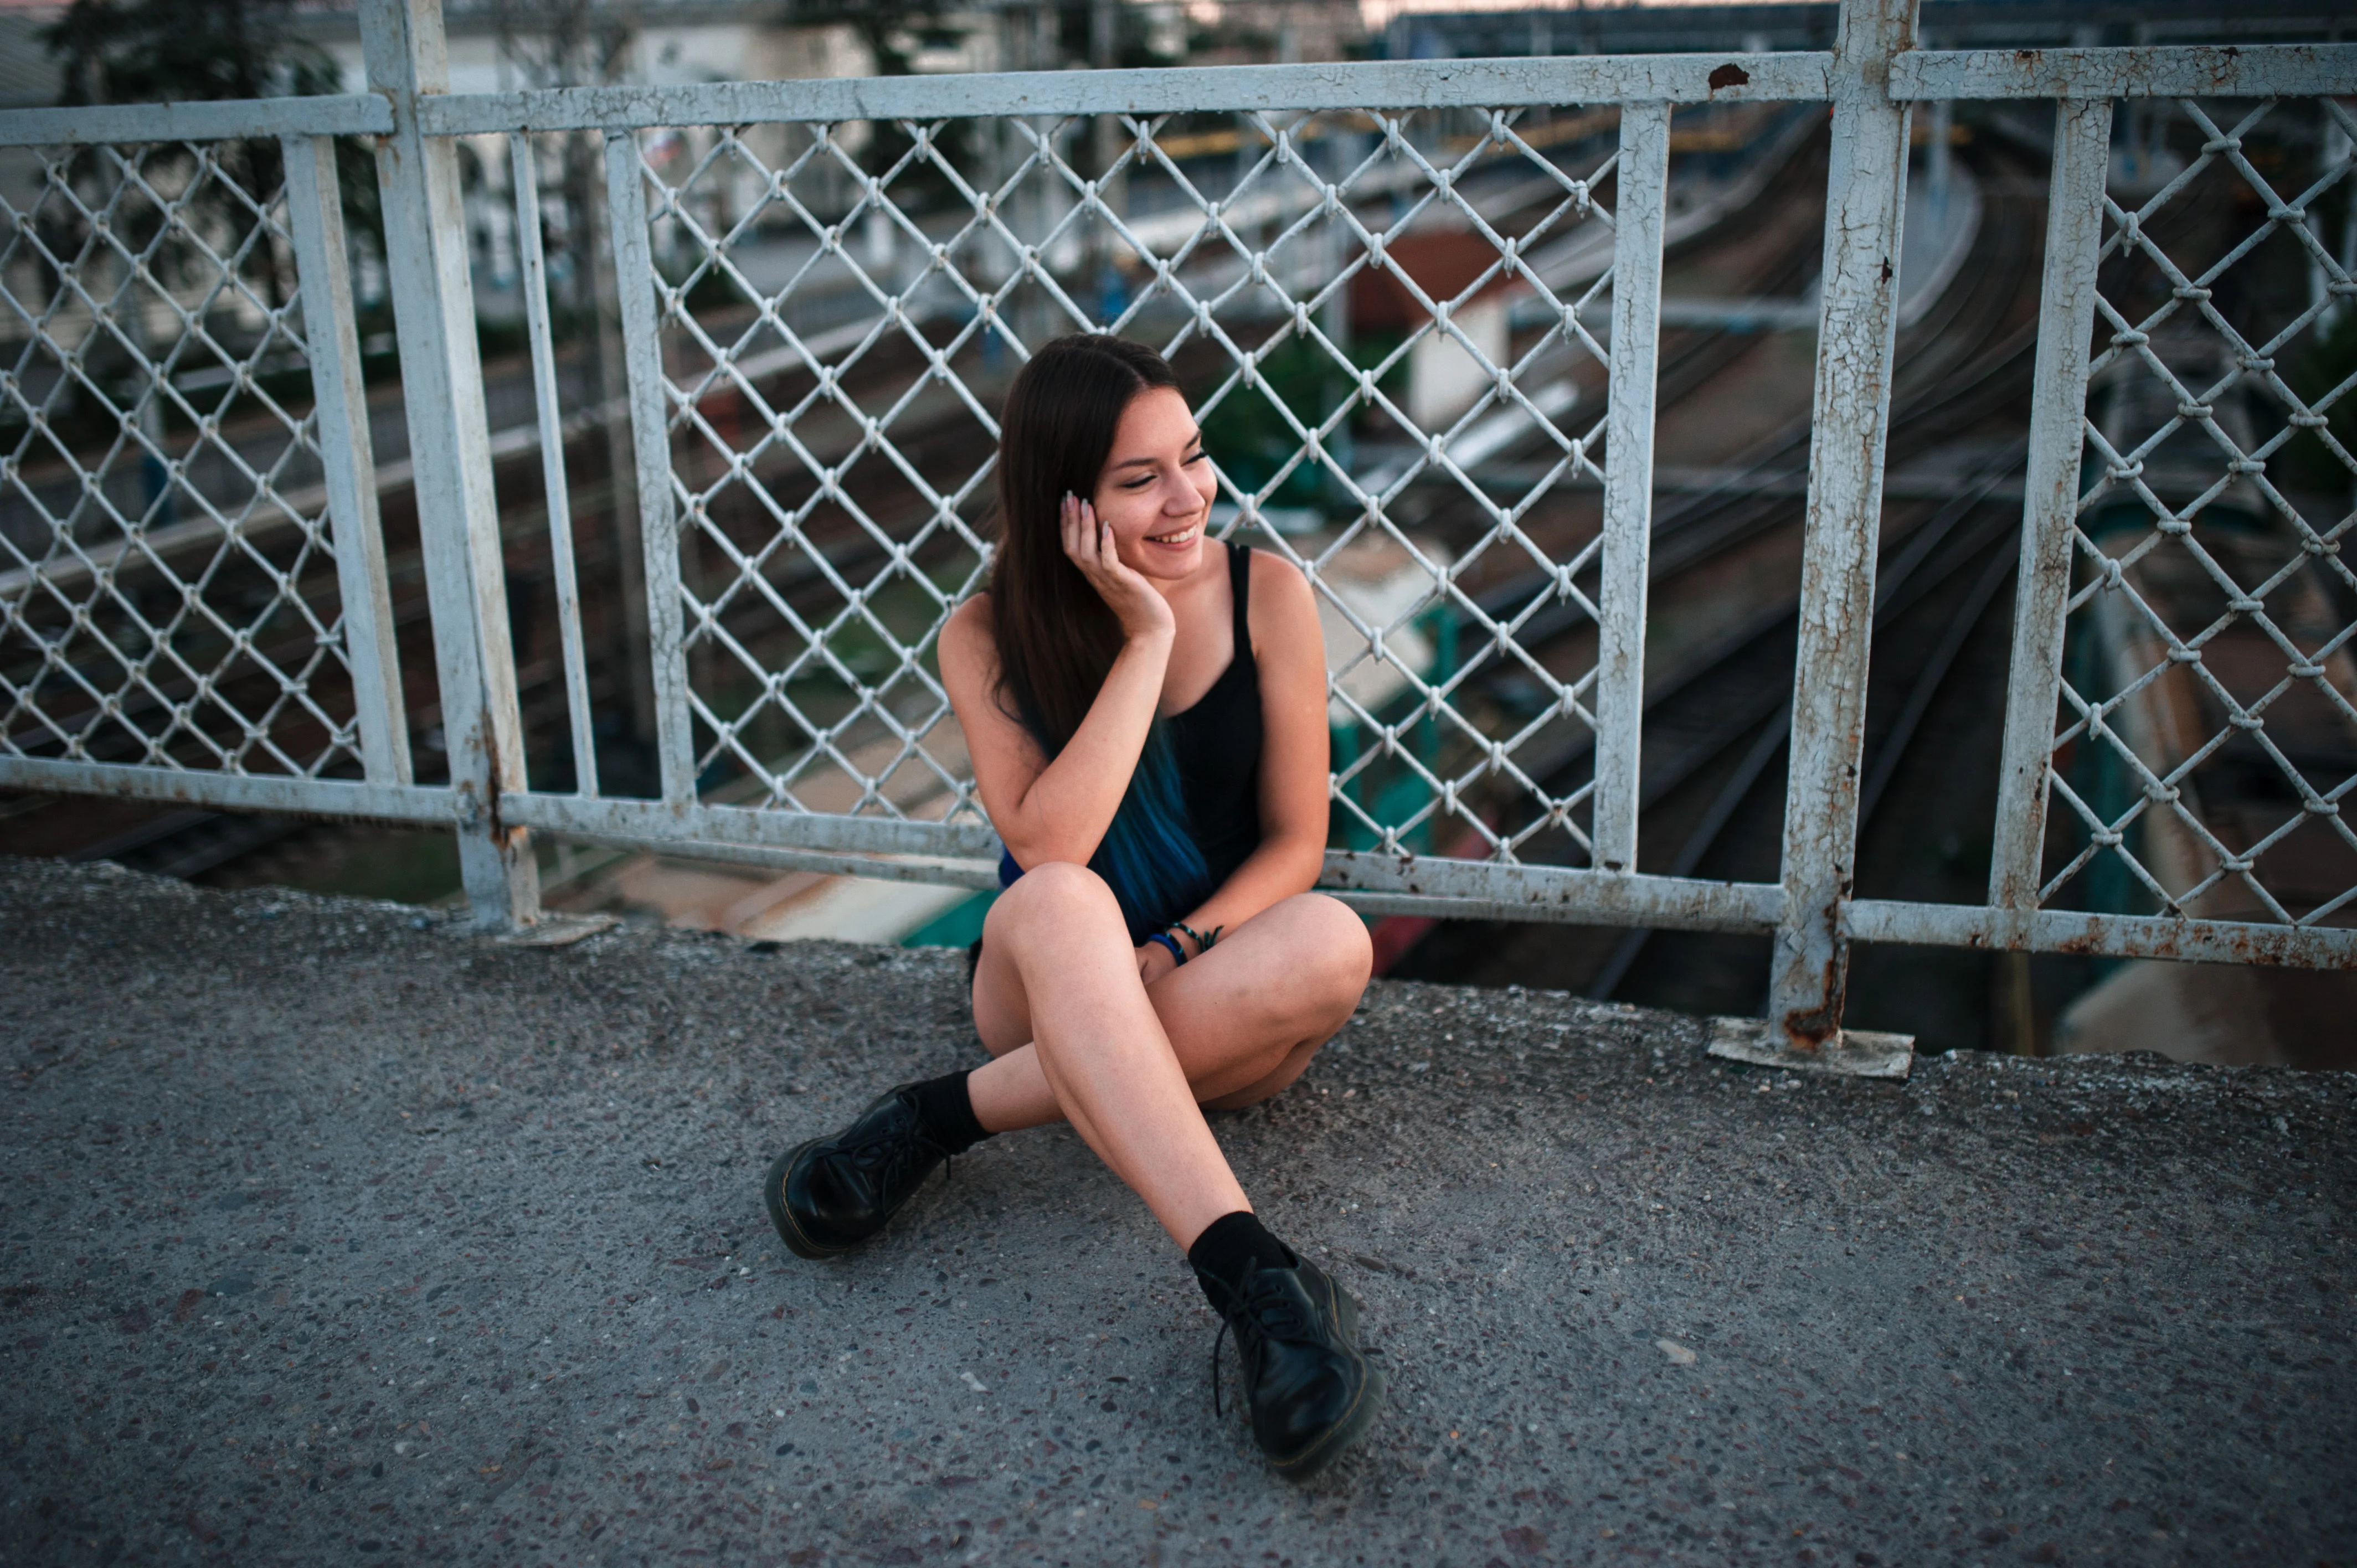 Girl sitting on a floor against a metal fence